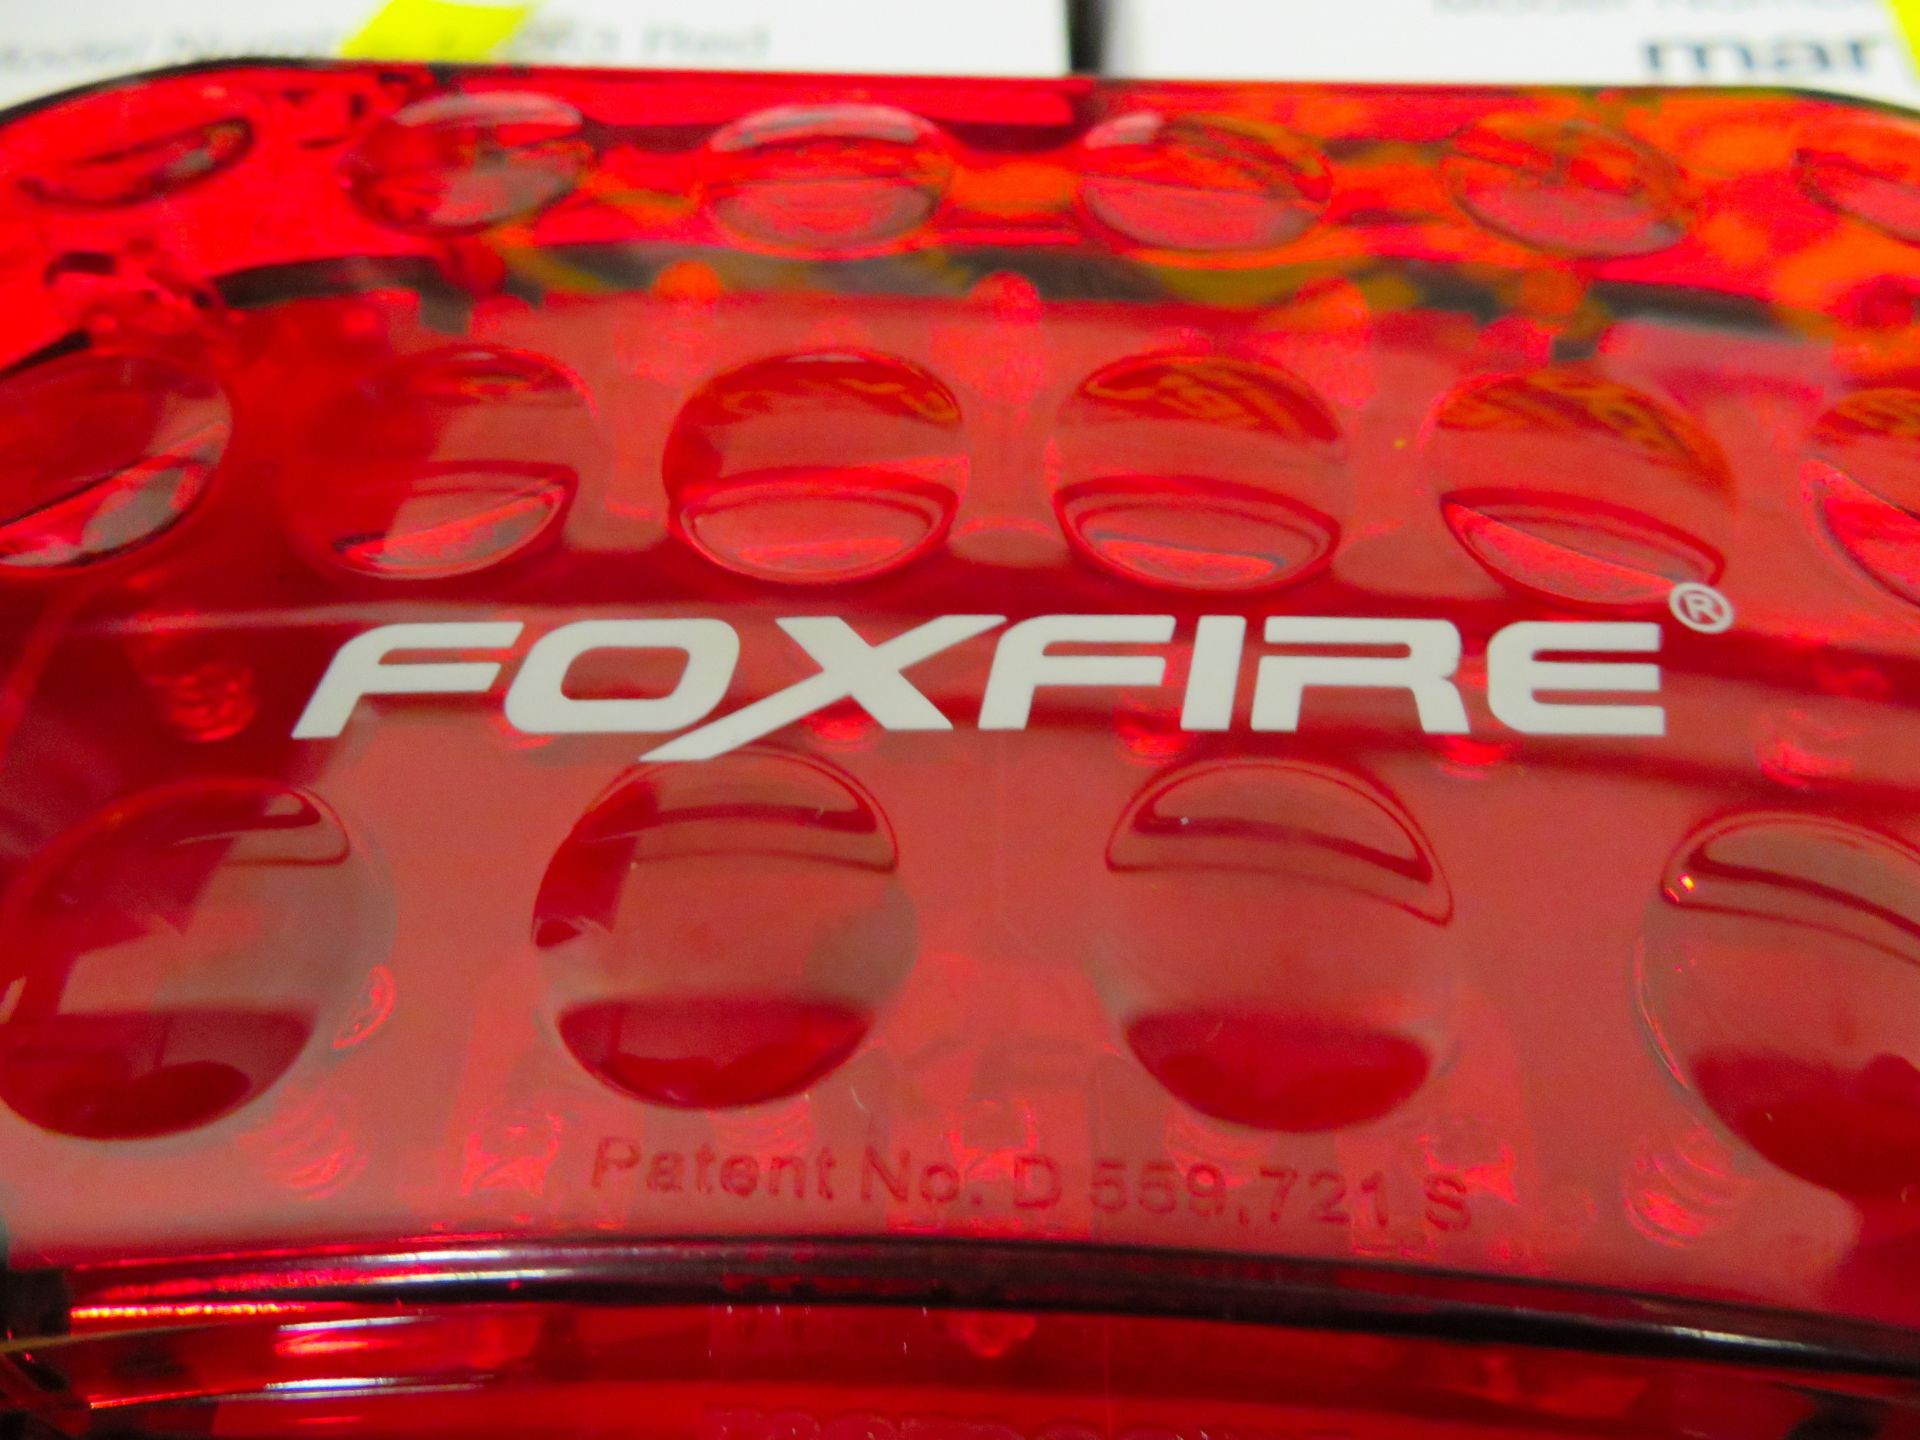 6x Foxfire Self-Surporting Lights Model F-263 Red - Image 2 of 3